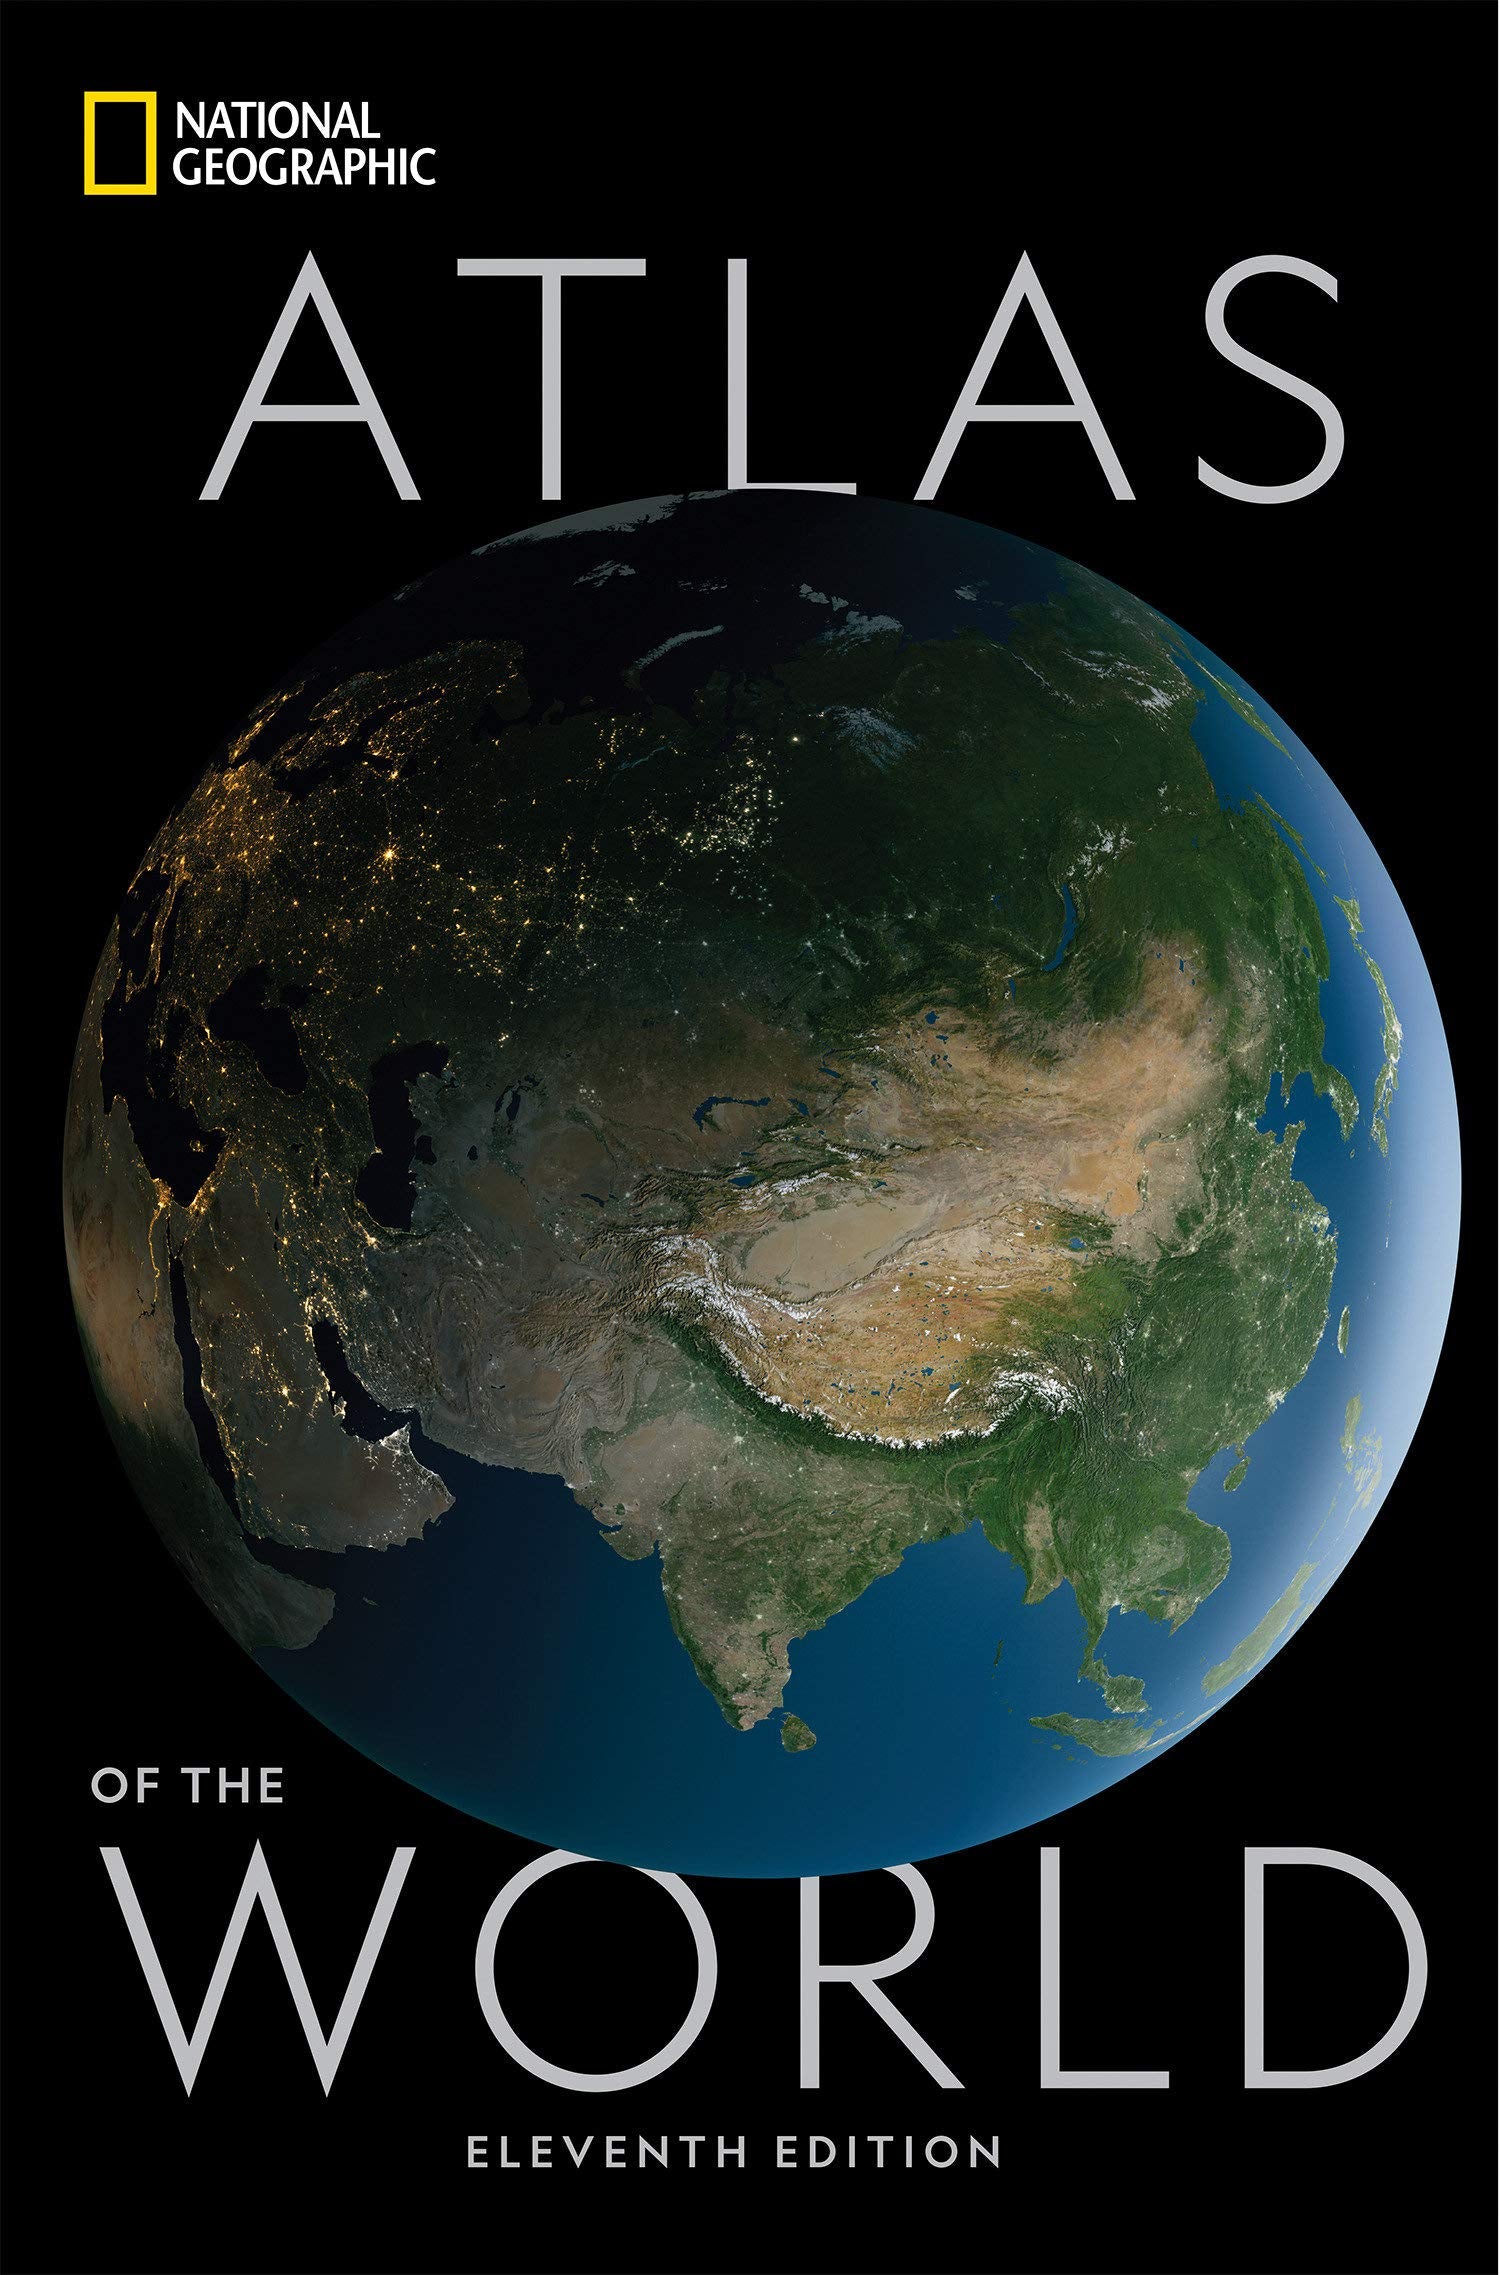 Atlas of the World - 11th edition